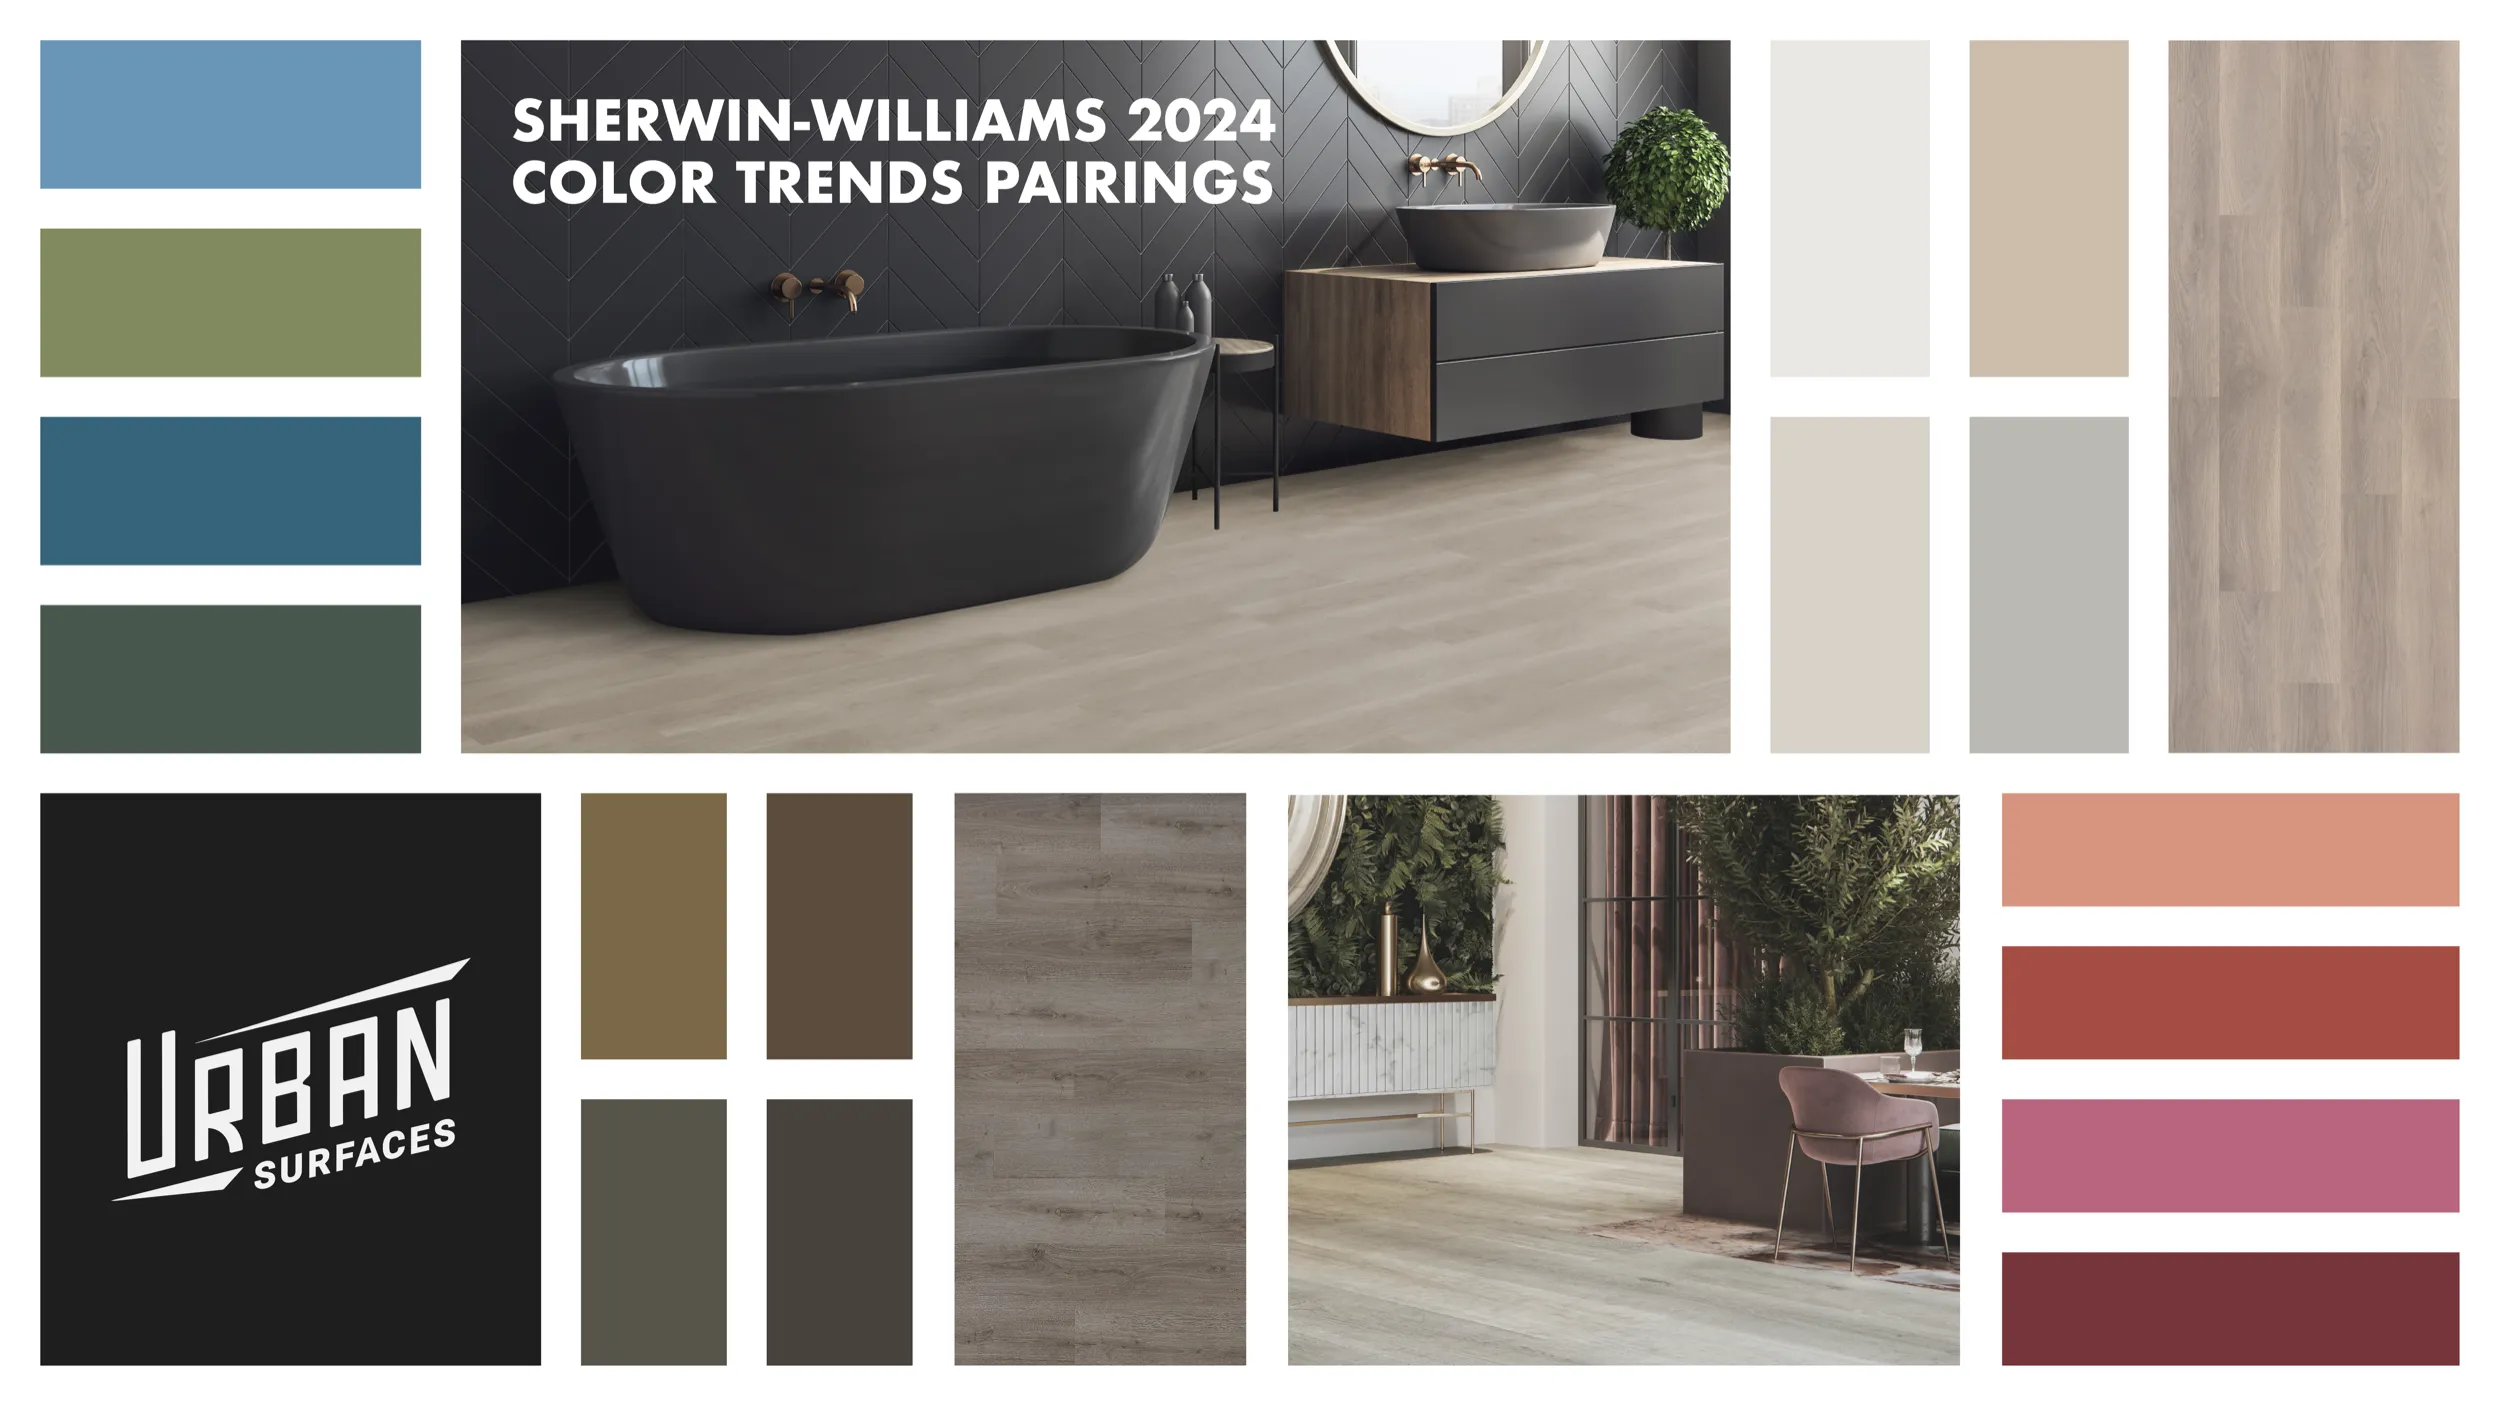 Collage of room scenes and color samples from Sherwin Williams 2024 Anthology: Volume One color trends report.